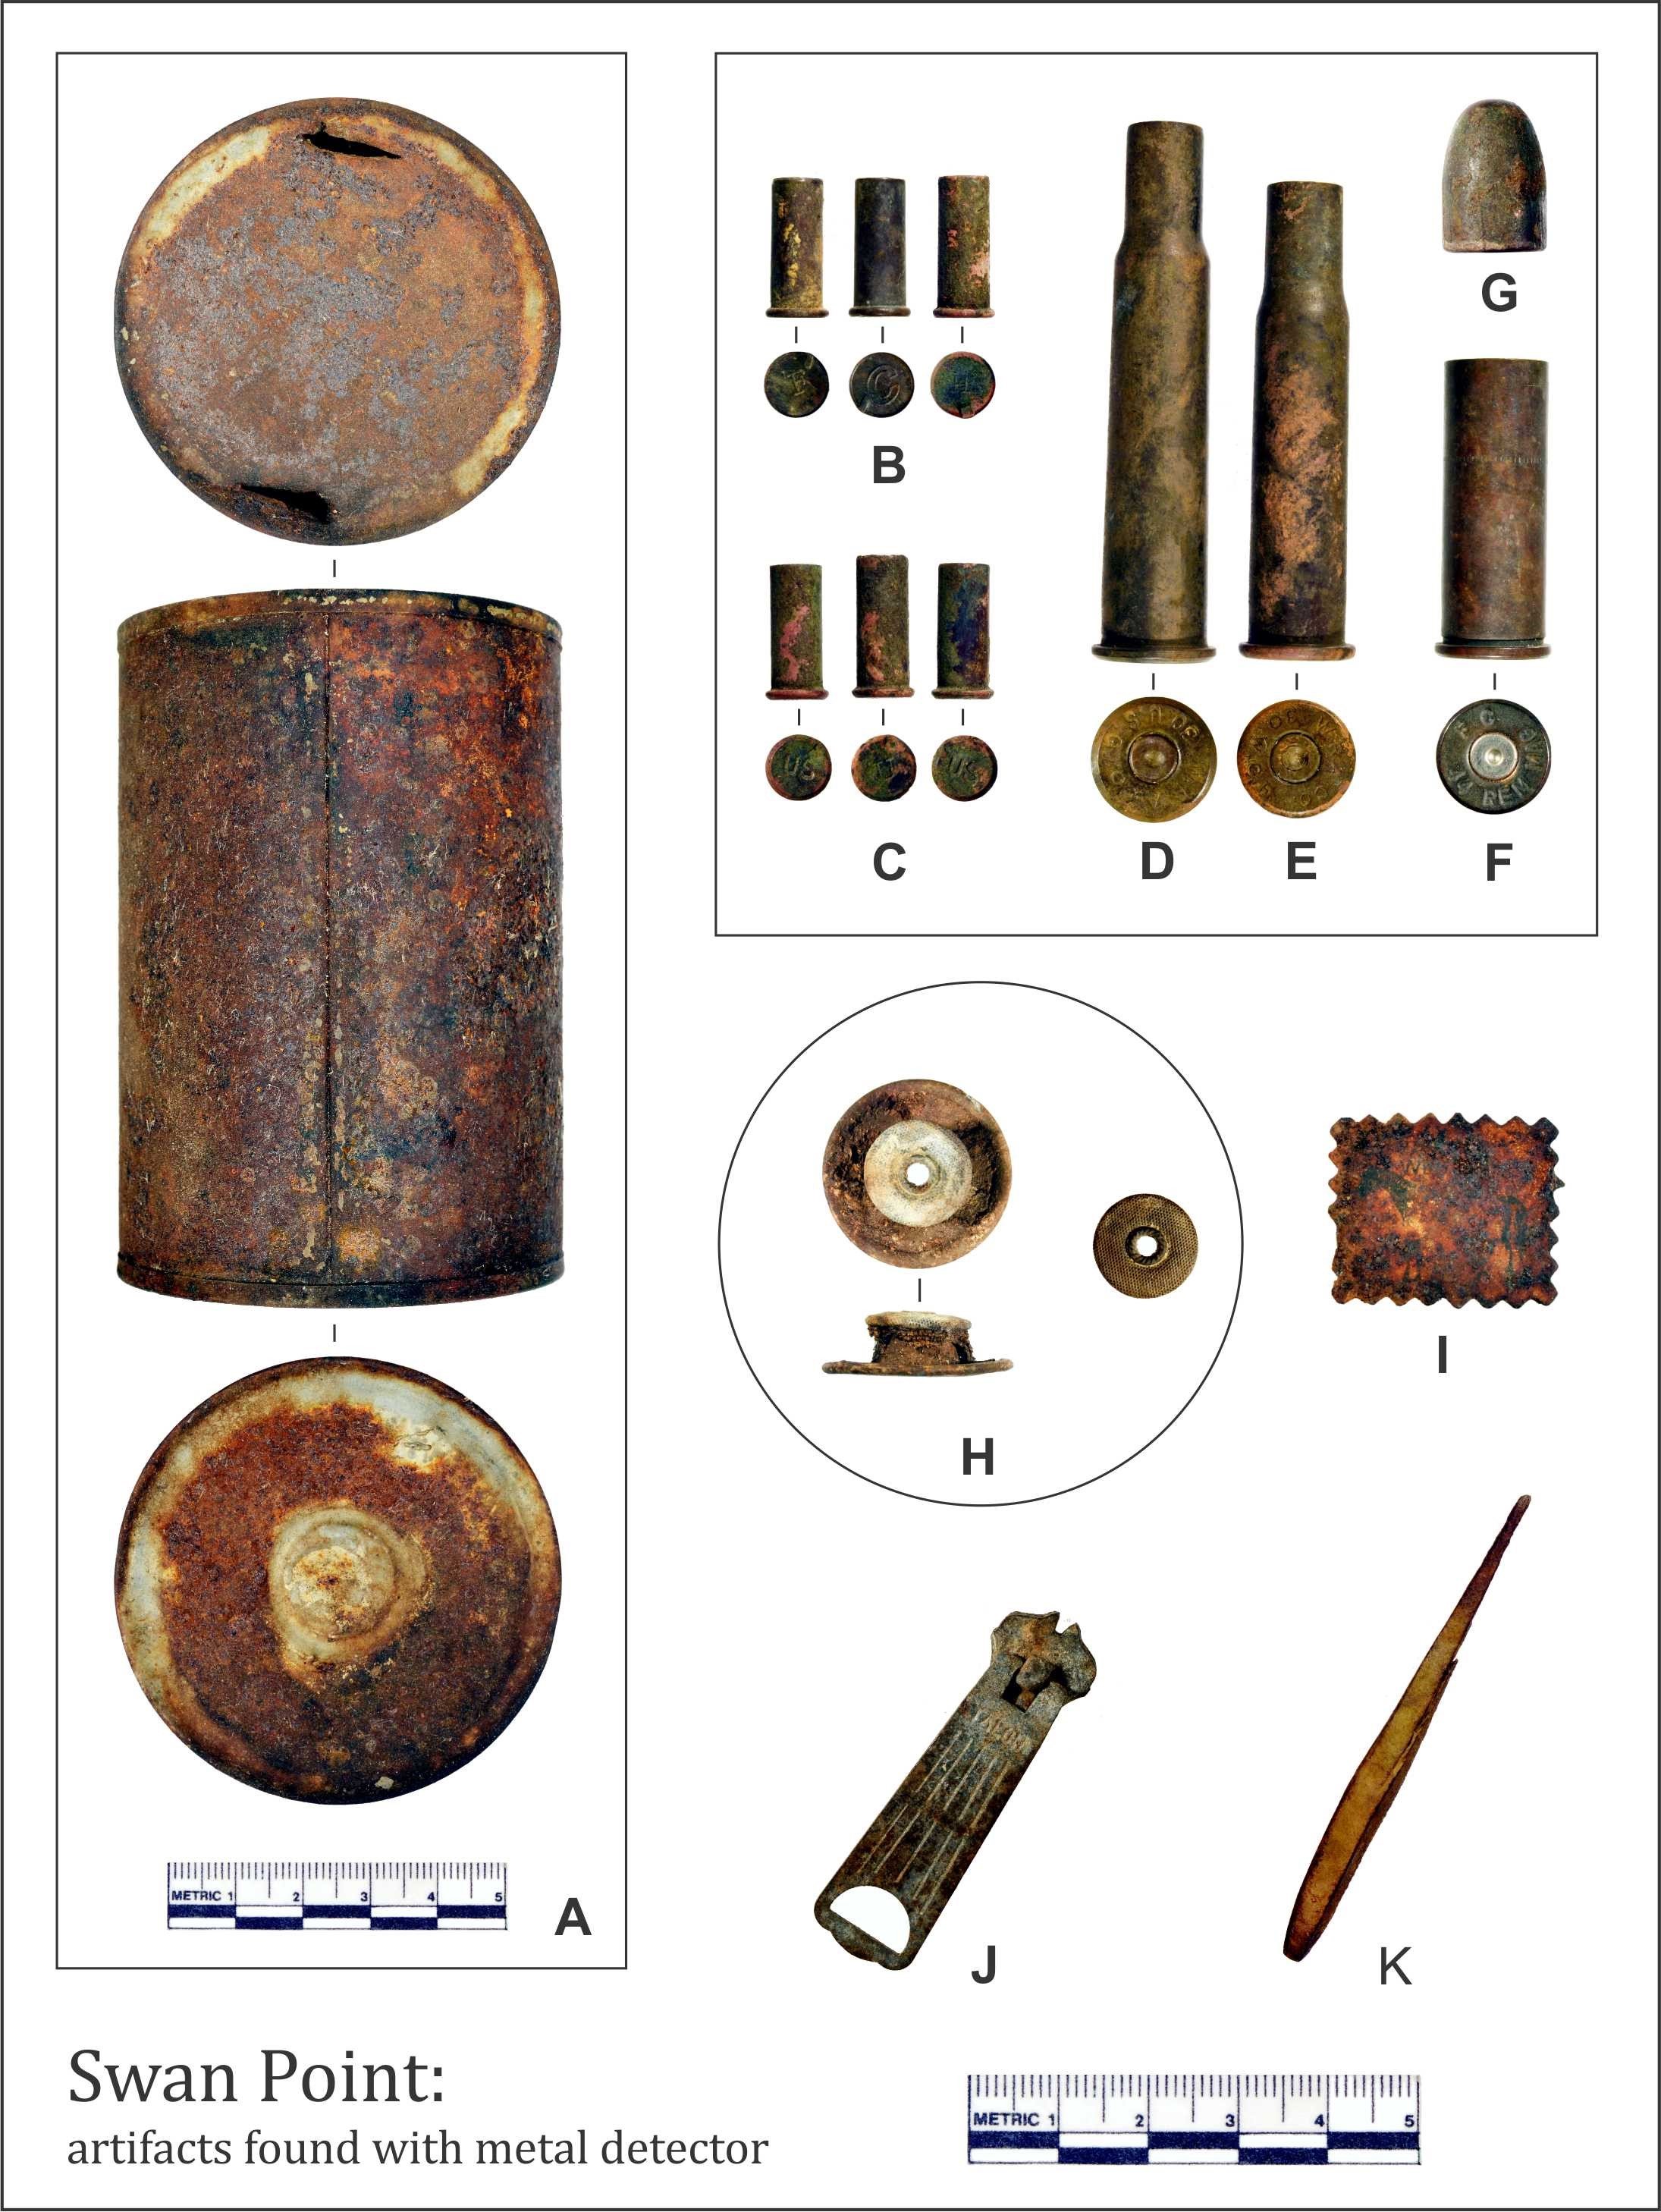 Examples of Swan Point metal artifacts: A. condensed milk can; B. .22 cal. (head stamps “F, C, H”); C. .22 cal. (head stamps “US, U, US”): D. .30-40 Krag (head stamp “W.R.A. Co. 30 U.S.G.”); E. .30 cal. (head stamp “W.R.A. Co. 30 W.C.F.”); E. .44 cal (head stamp “F C 44 REM MAG”); G. .44 cal bullet; H. grommet fasteners; I. tobacco tag, race horse logo; J. zipper pull, “TALON;” K. copper awl.